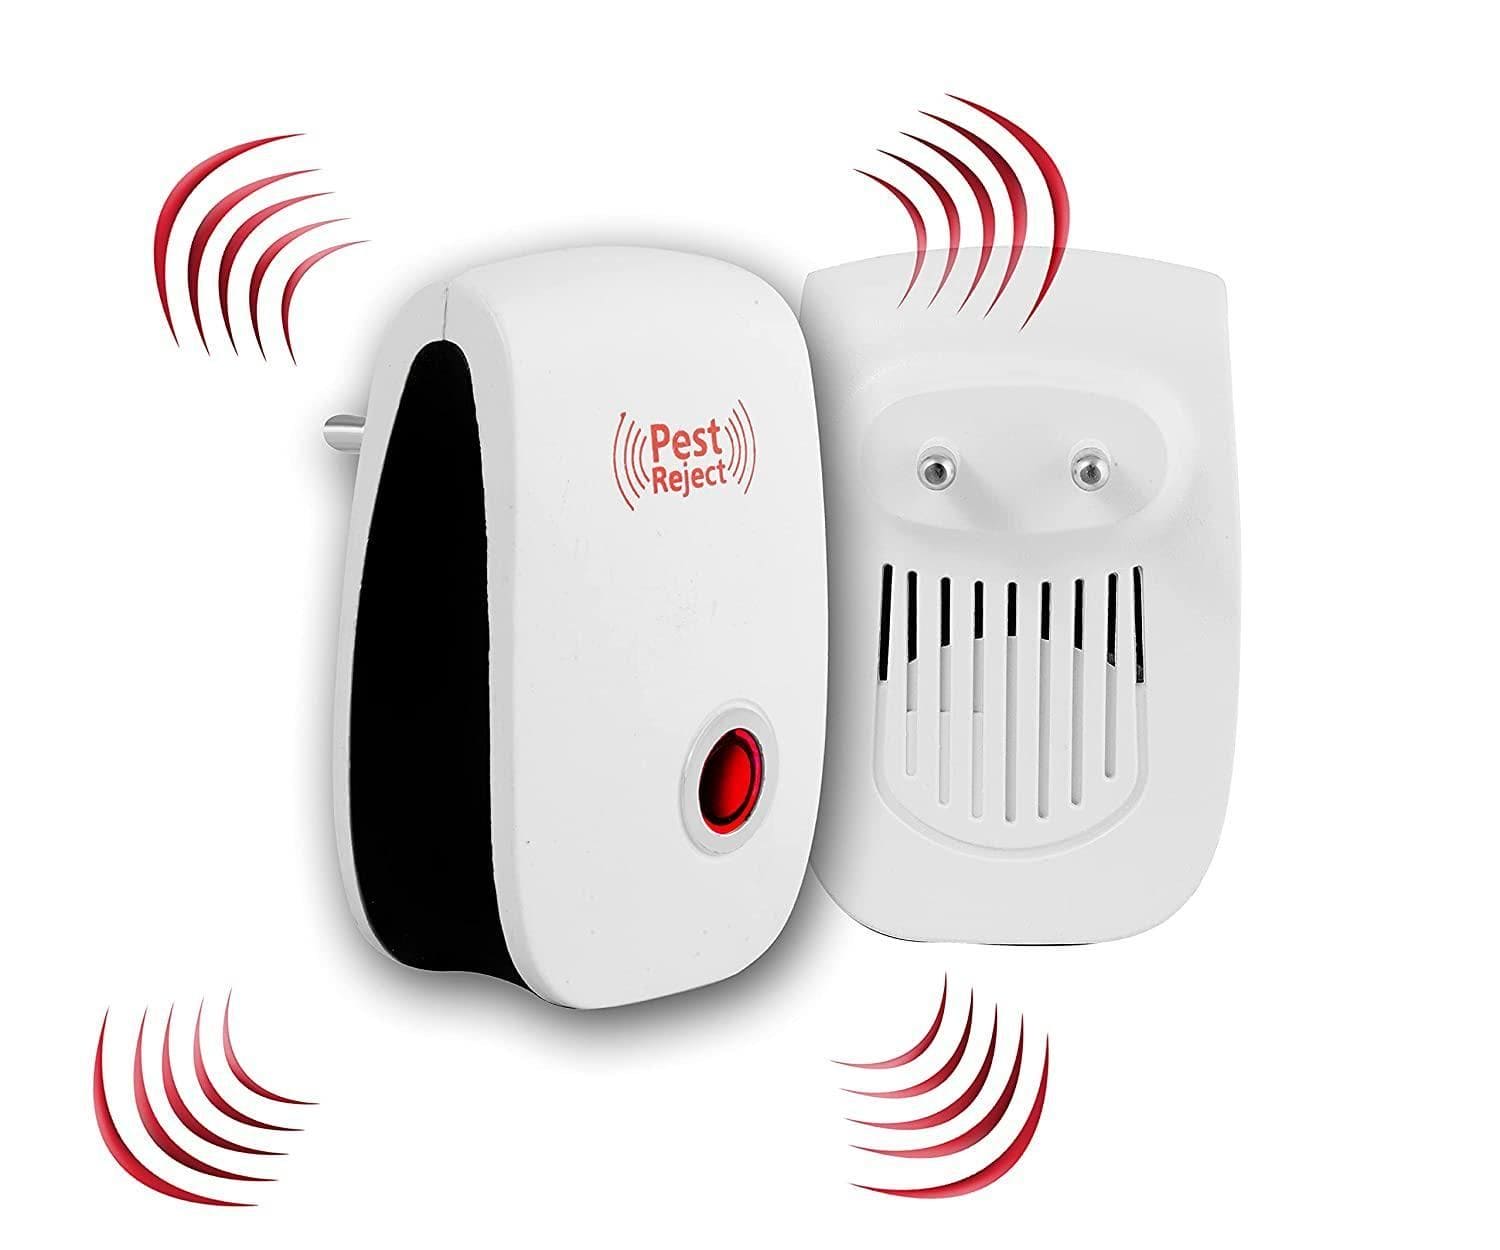 Ultrasonic Pest Repeller Machine for Mosquito Rats Cockroach Home Plug in Electric Pest Repellent Pest Control Reject Aid (Red) - Fizzibyizzi